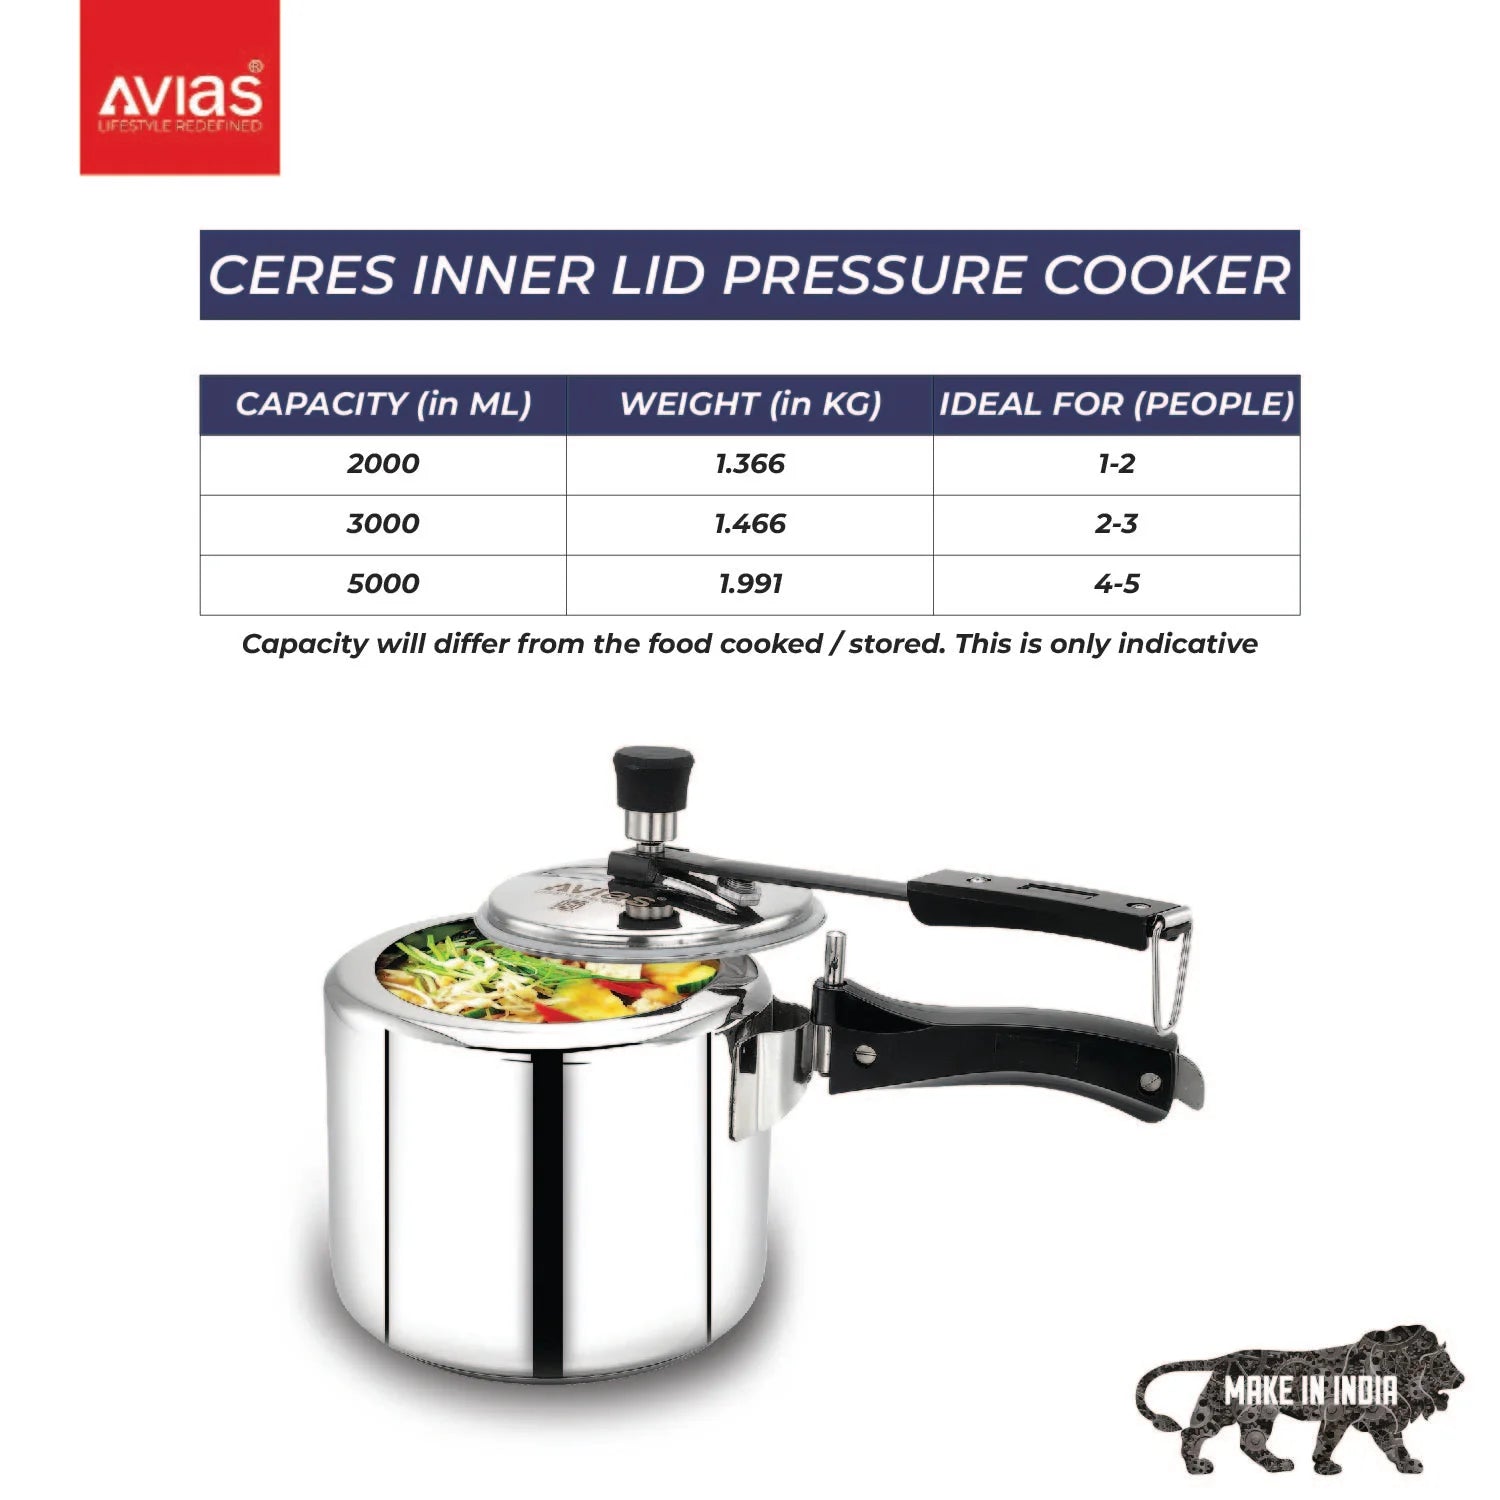 AVIAS Ceres Stainless Steel Premium Pressure Cooker capacity and ideal for people